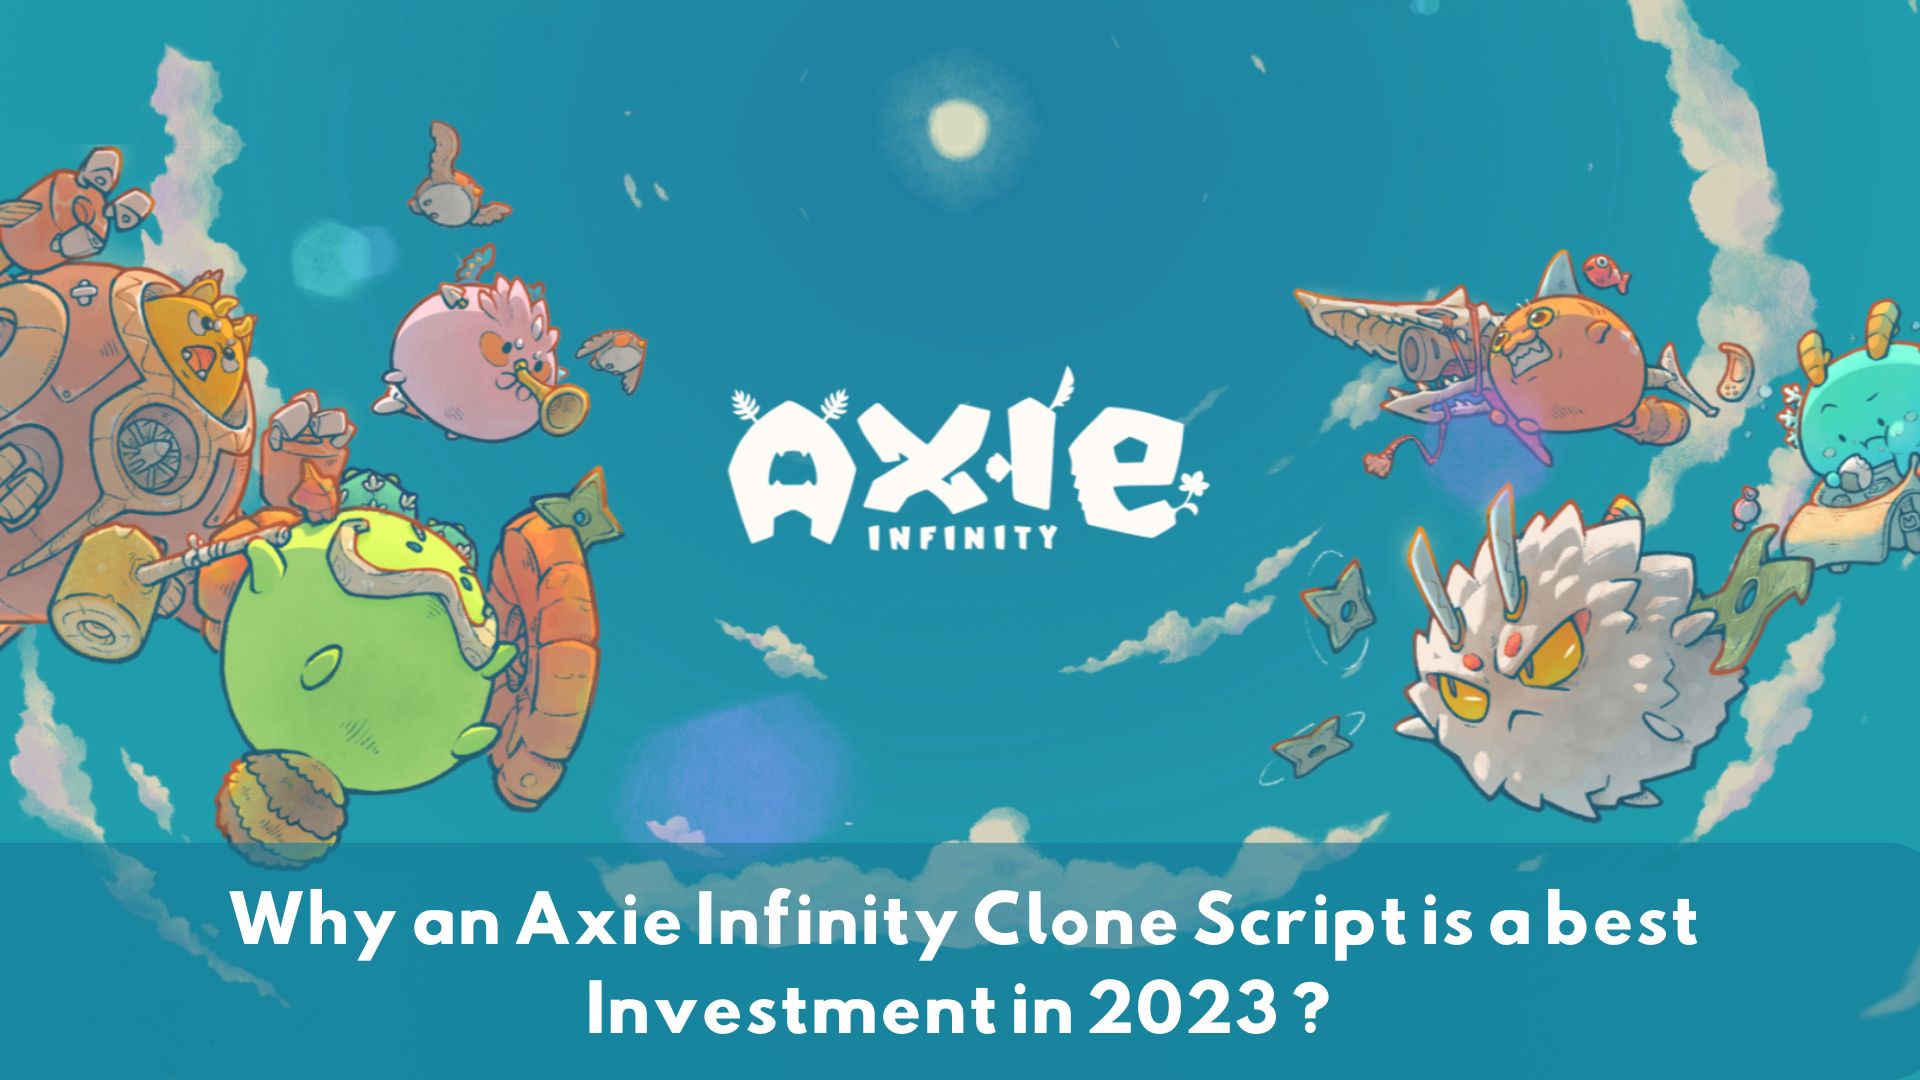 Why is an Axie Infinity Clone Script a Best Investment in 2023?